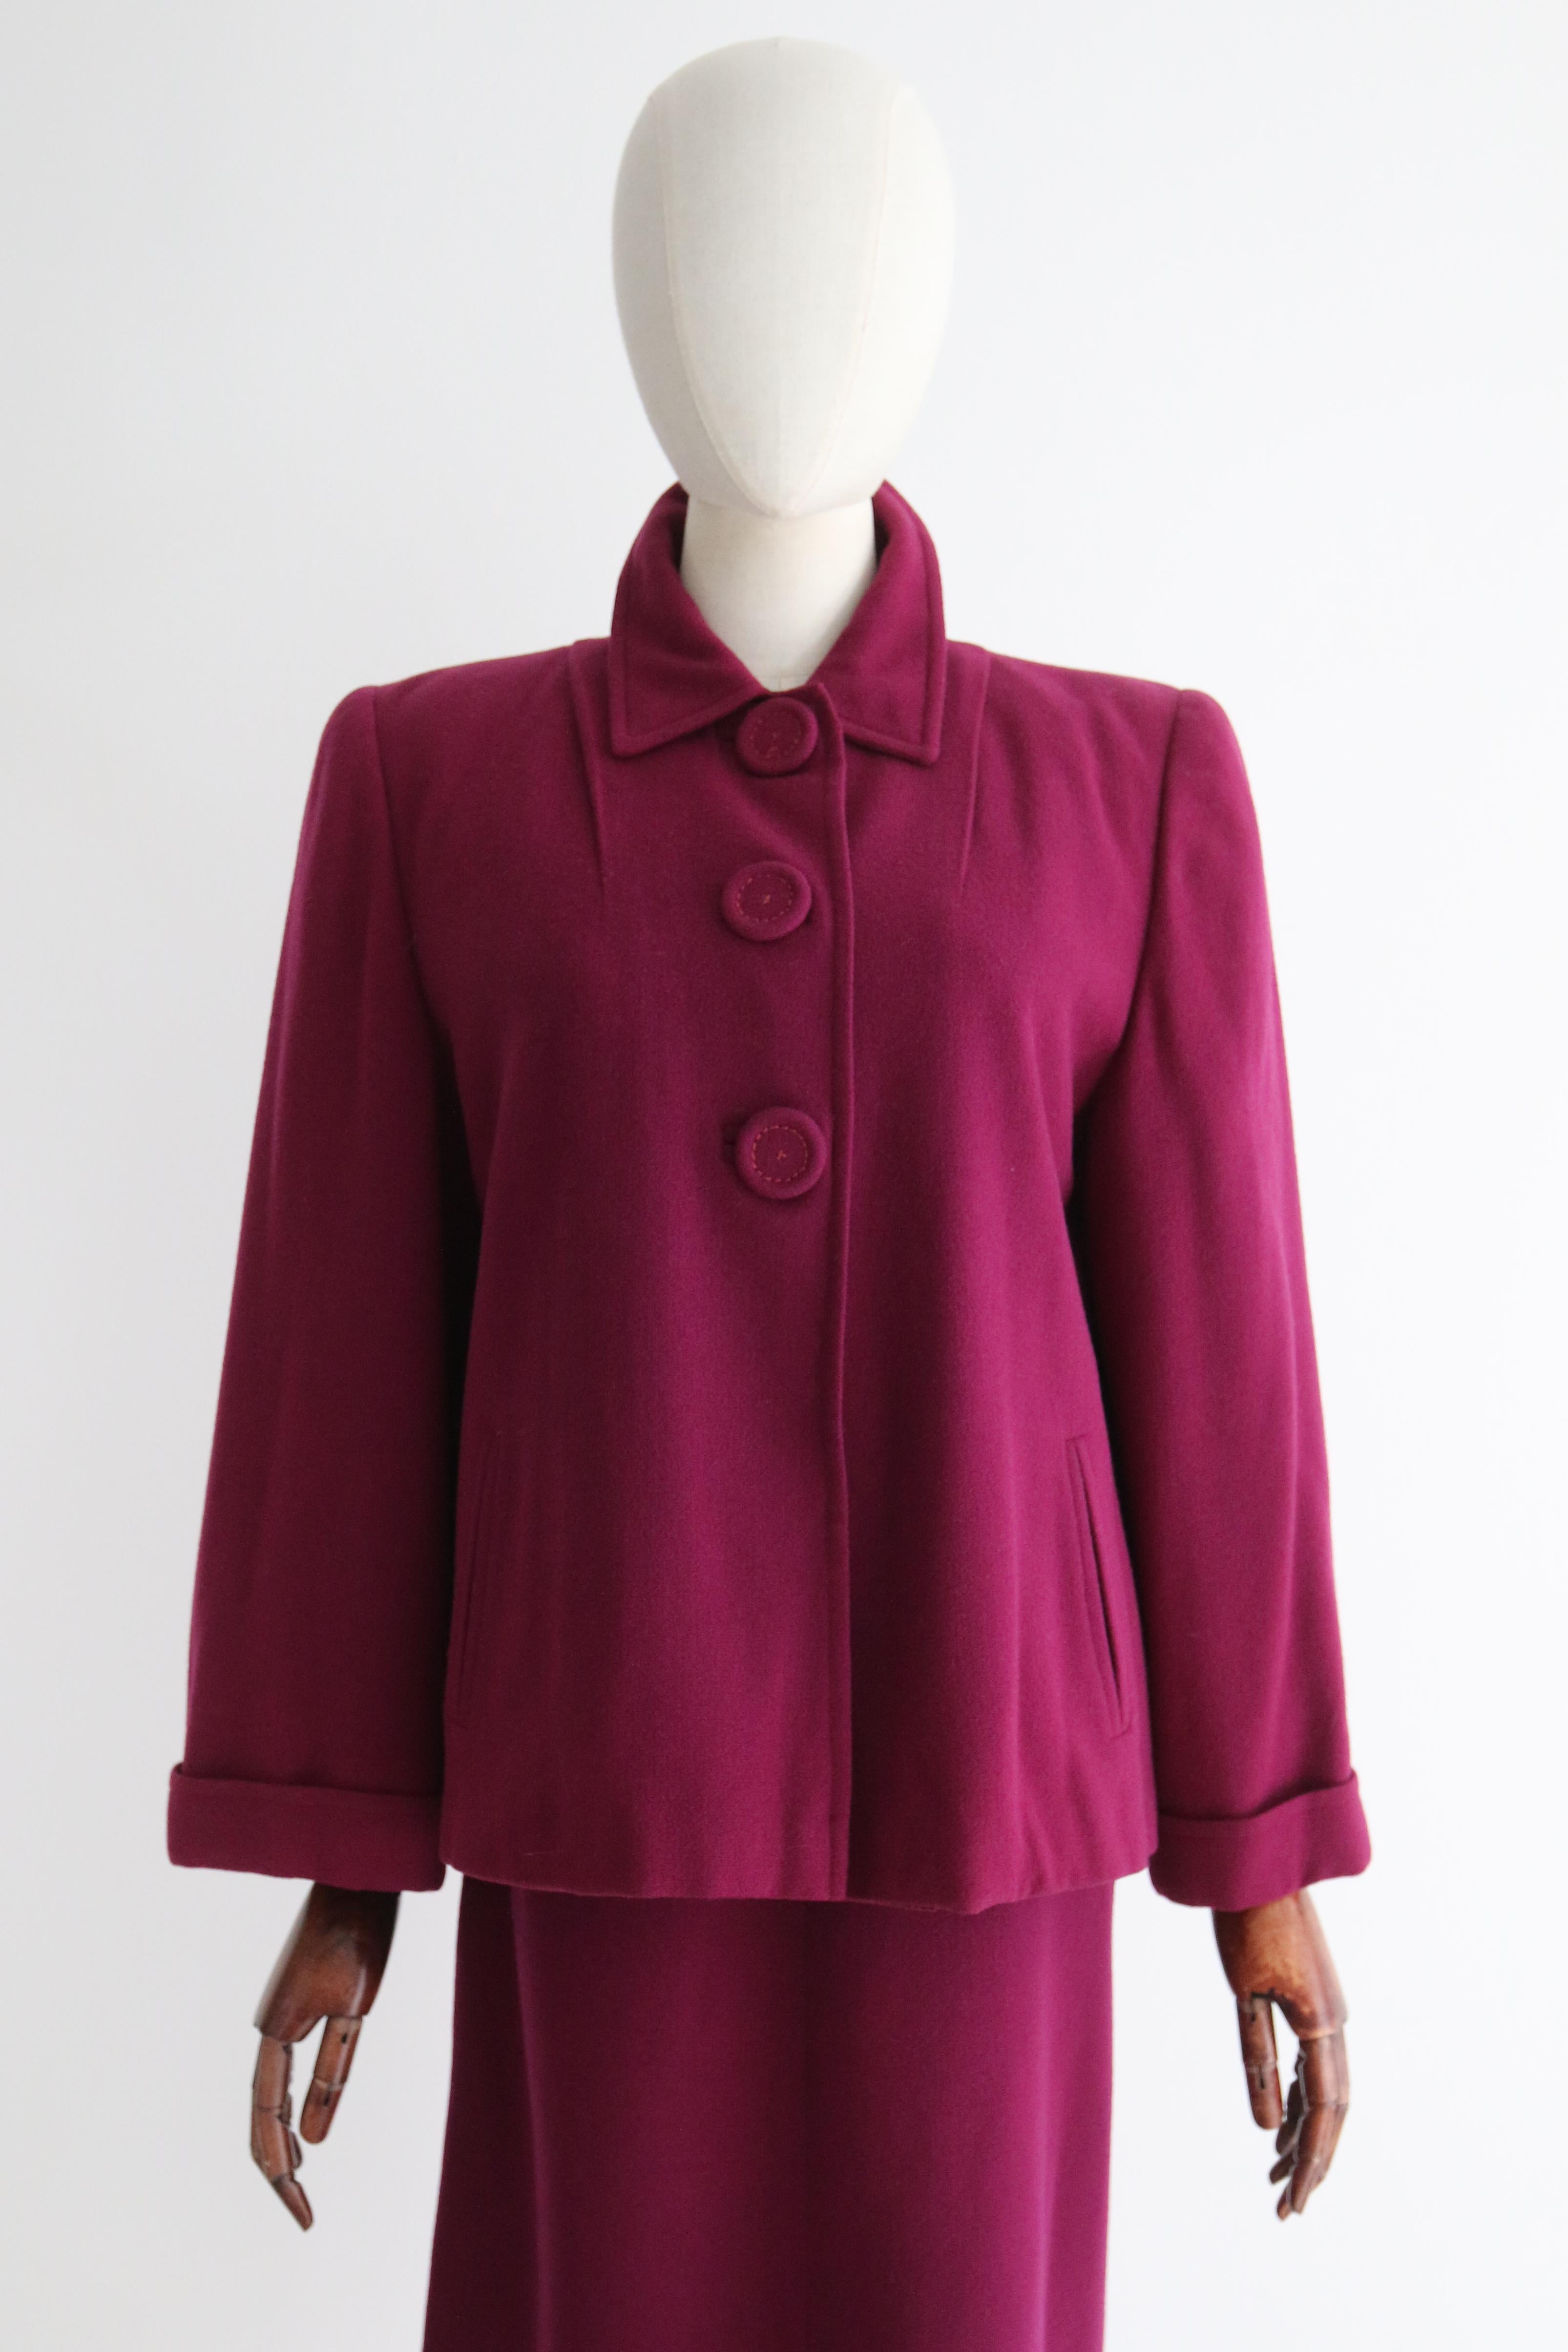 A classic silhouette rendered in a stunning pleasant plum  wool, this 1940's tailored three piece skirt suit is the perfect addition to your vintage wardrobe.

The rounded neckline of the jacket is framed by a pointed collar. The structured shoulder